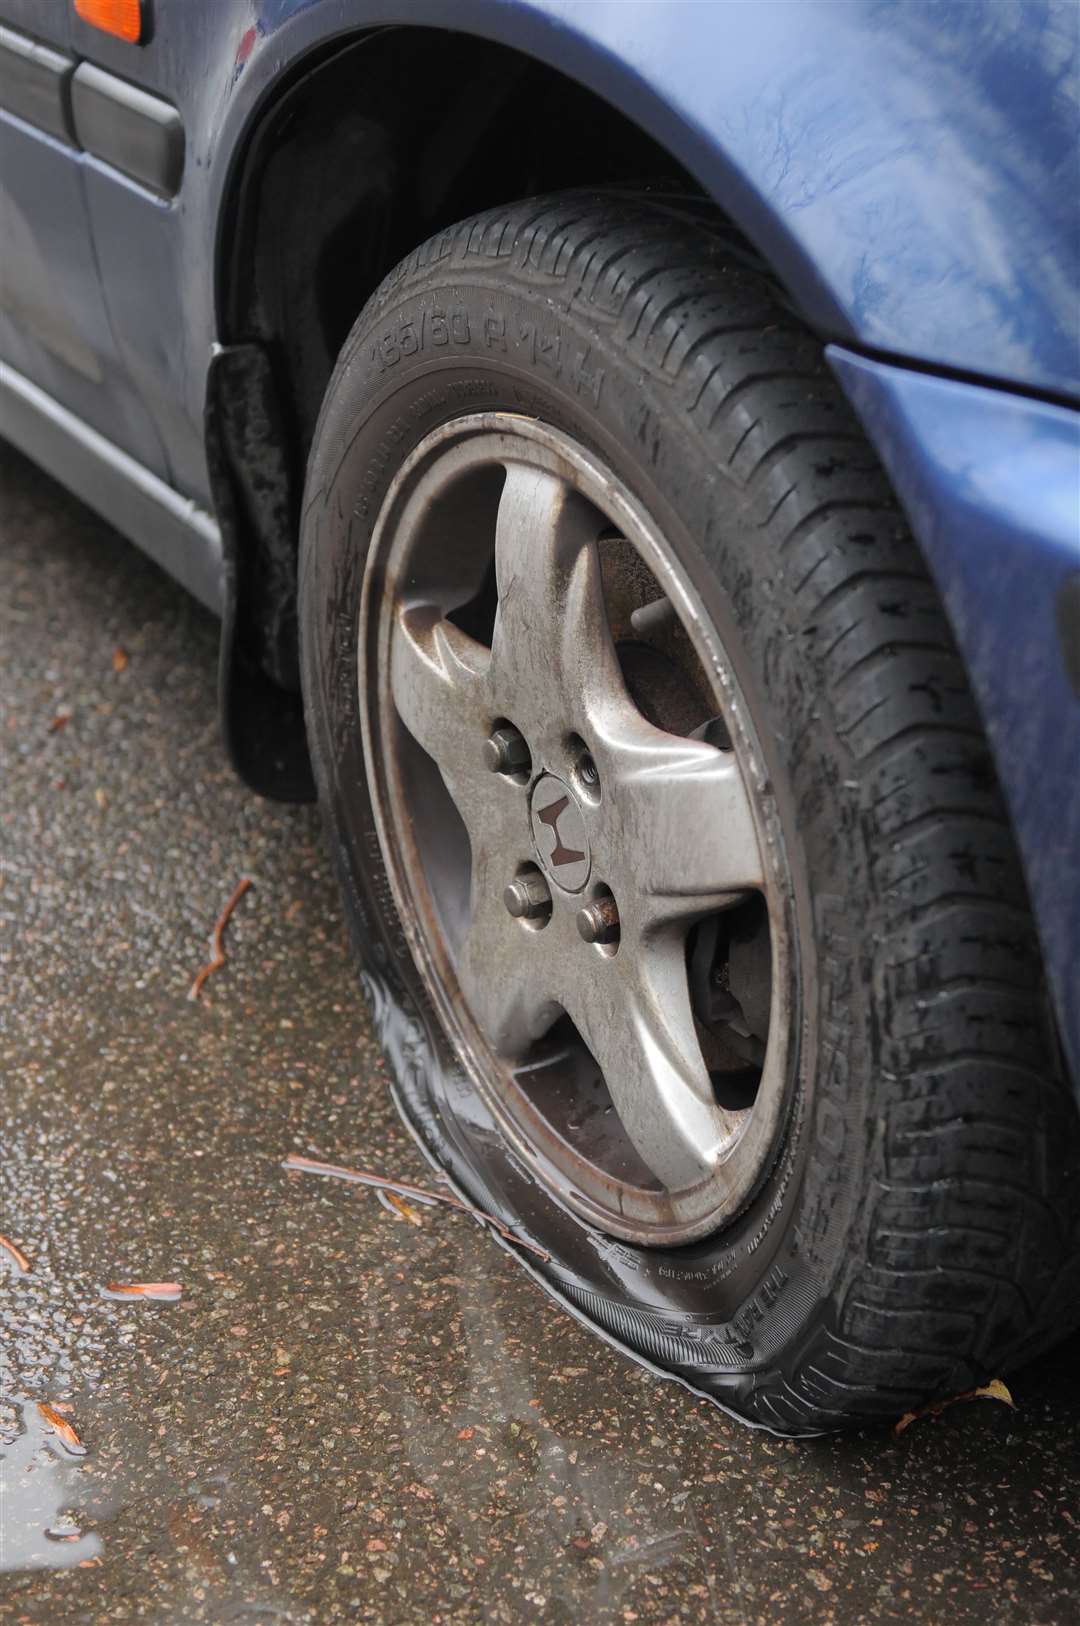 Stock pic: slashed tyre